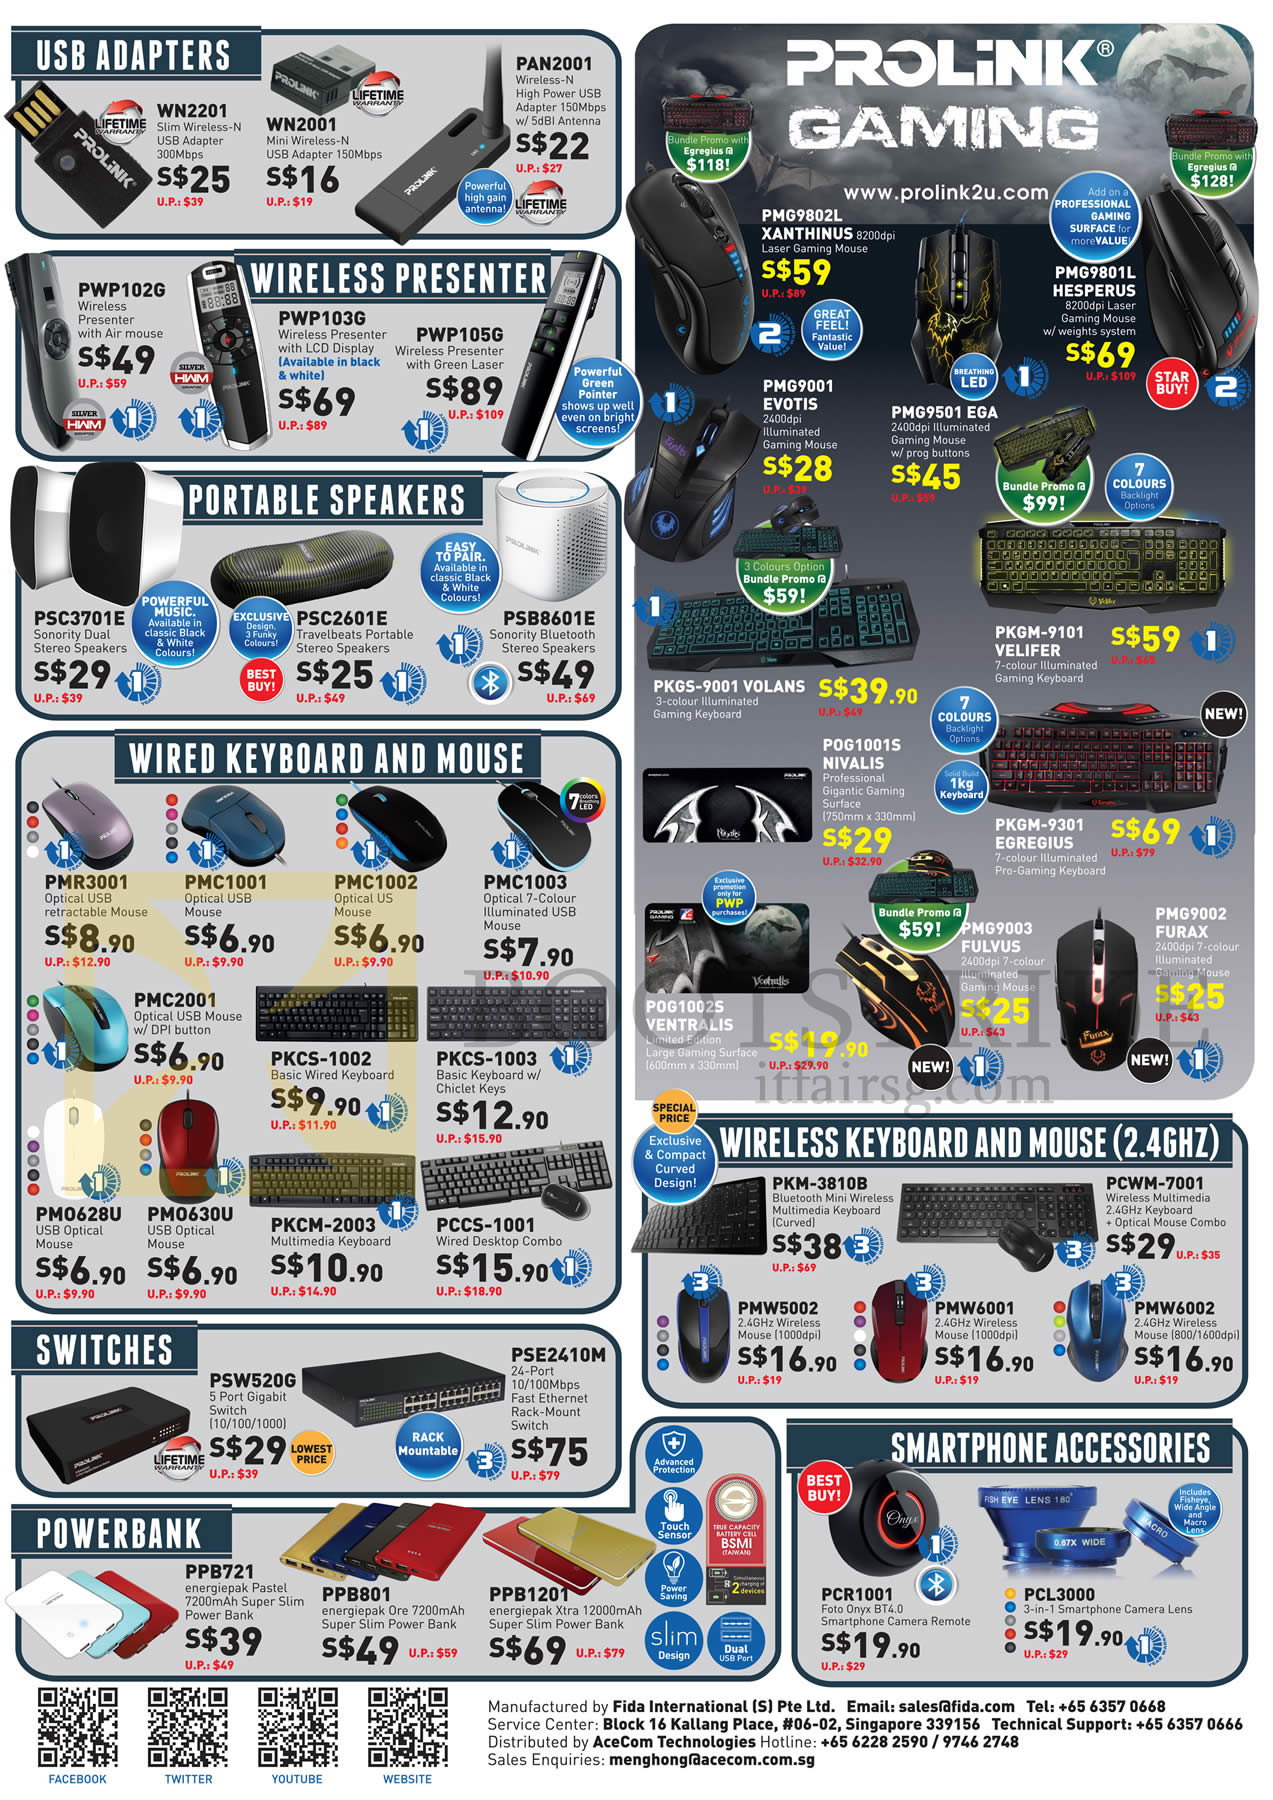 IT SHOW 2015 price list image brochure of Prolink USB Adapters, Wireless Presenter, Portable Speakers, Wired, Wireless Keyboard, Mouse, Switches, Powerbank, Smartphone Accessories